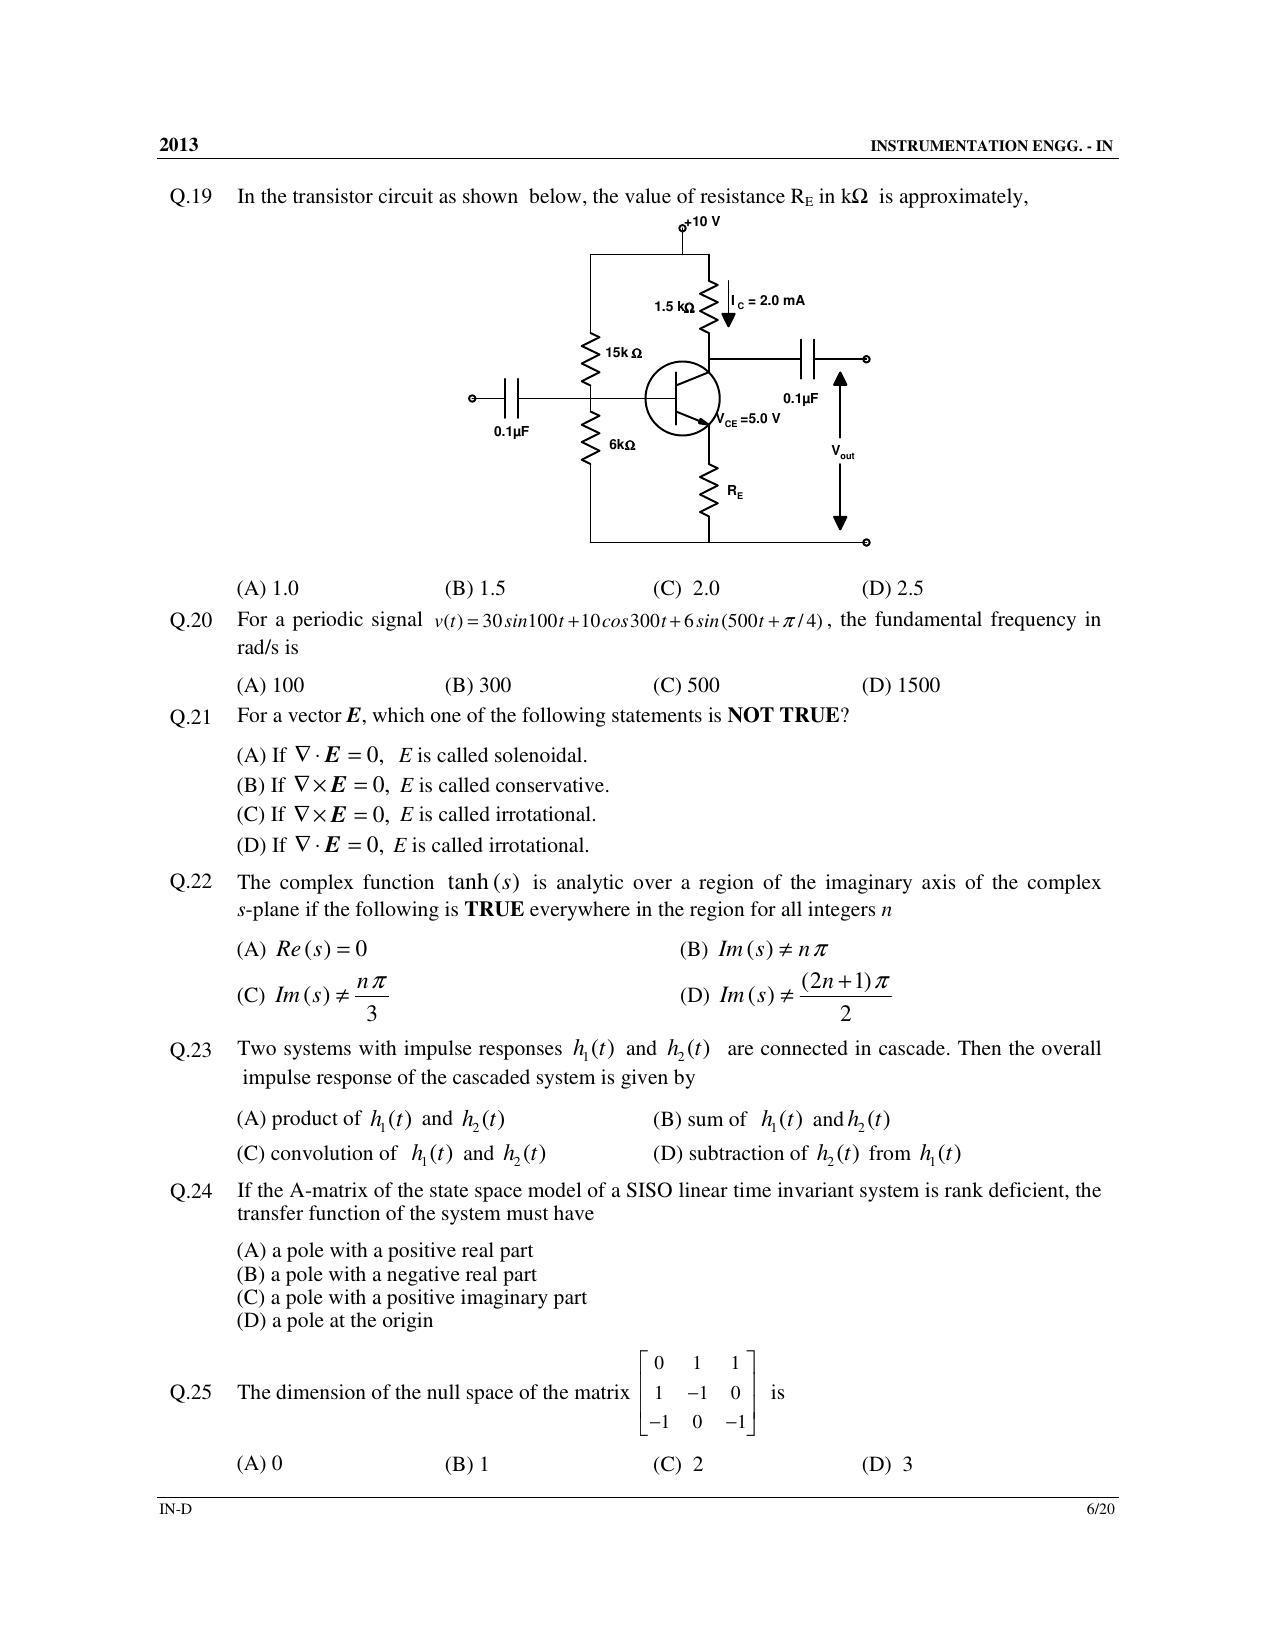 GATE 2013 Instrumentation Engineering (IN) Question Paper with Answer Key - Page 58